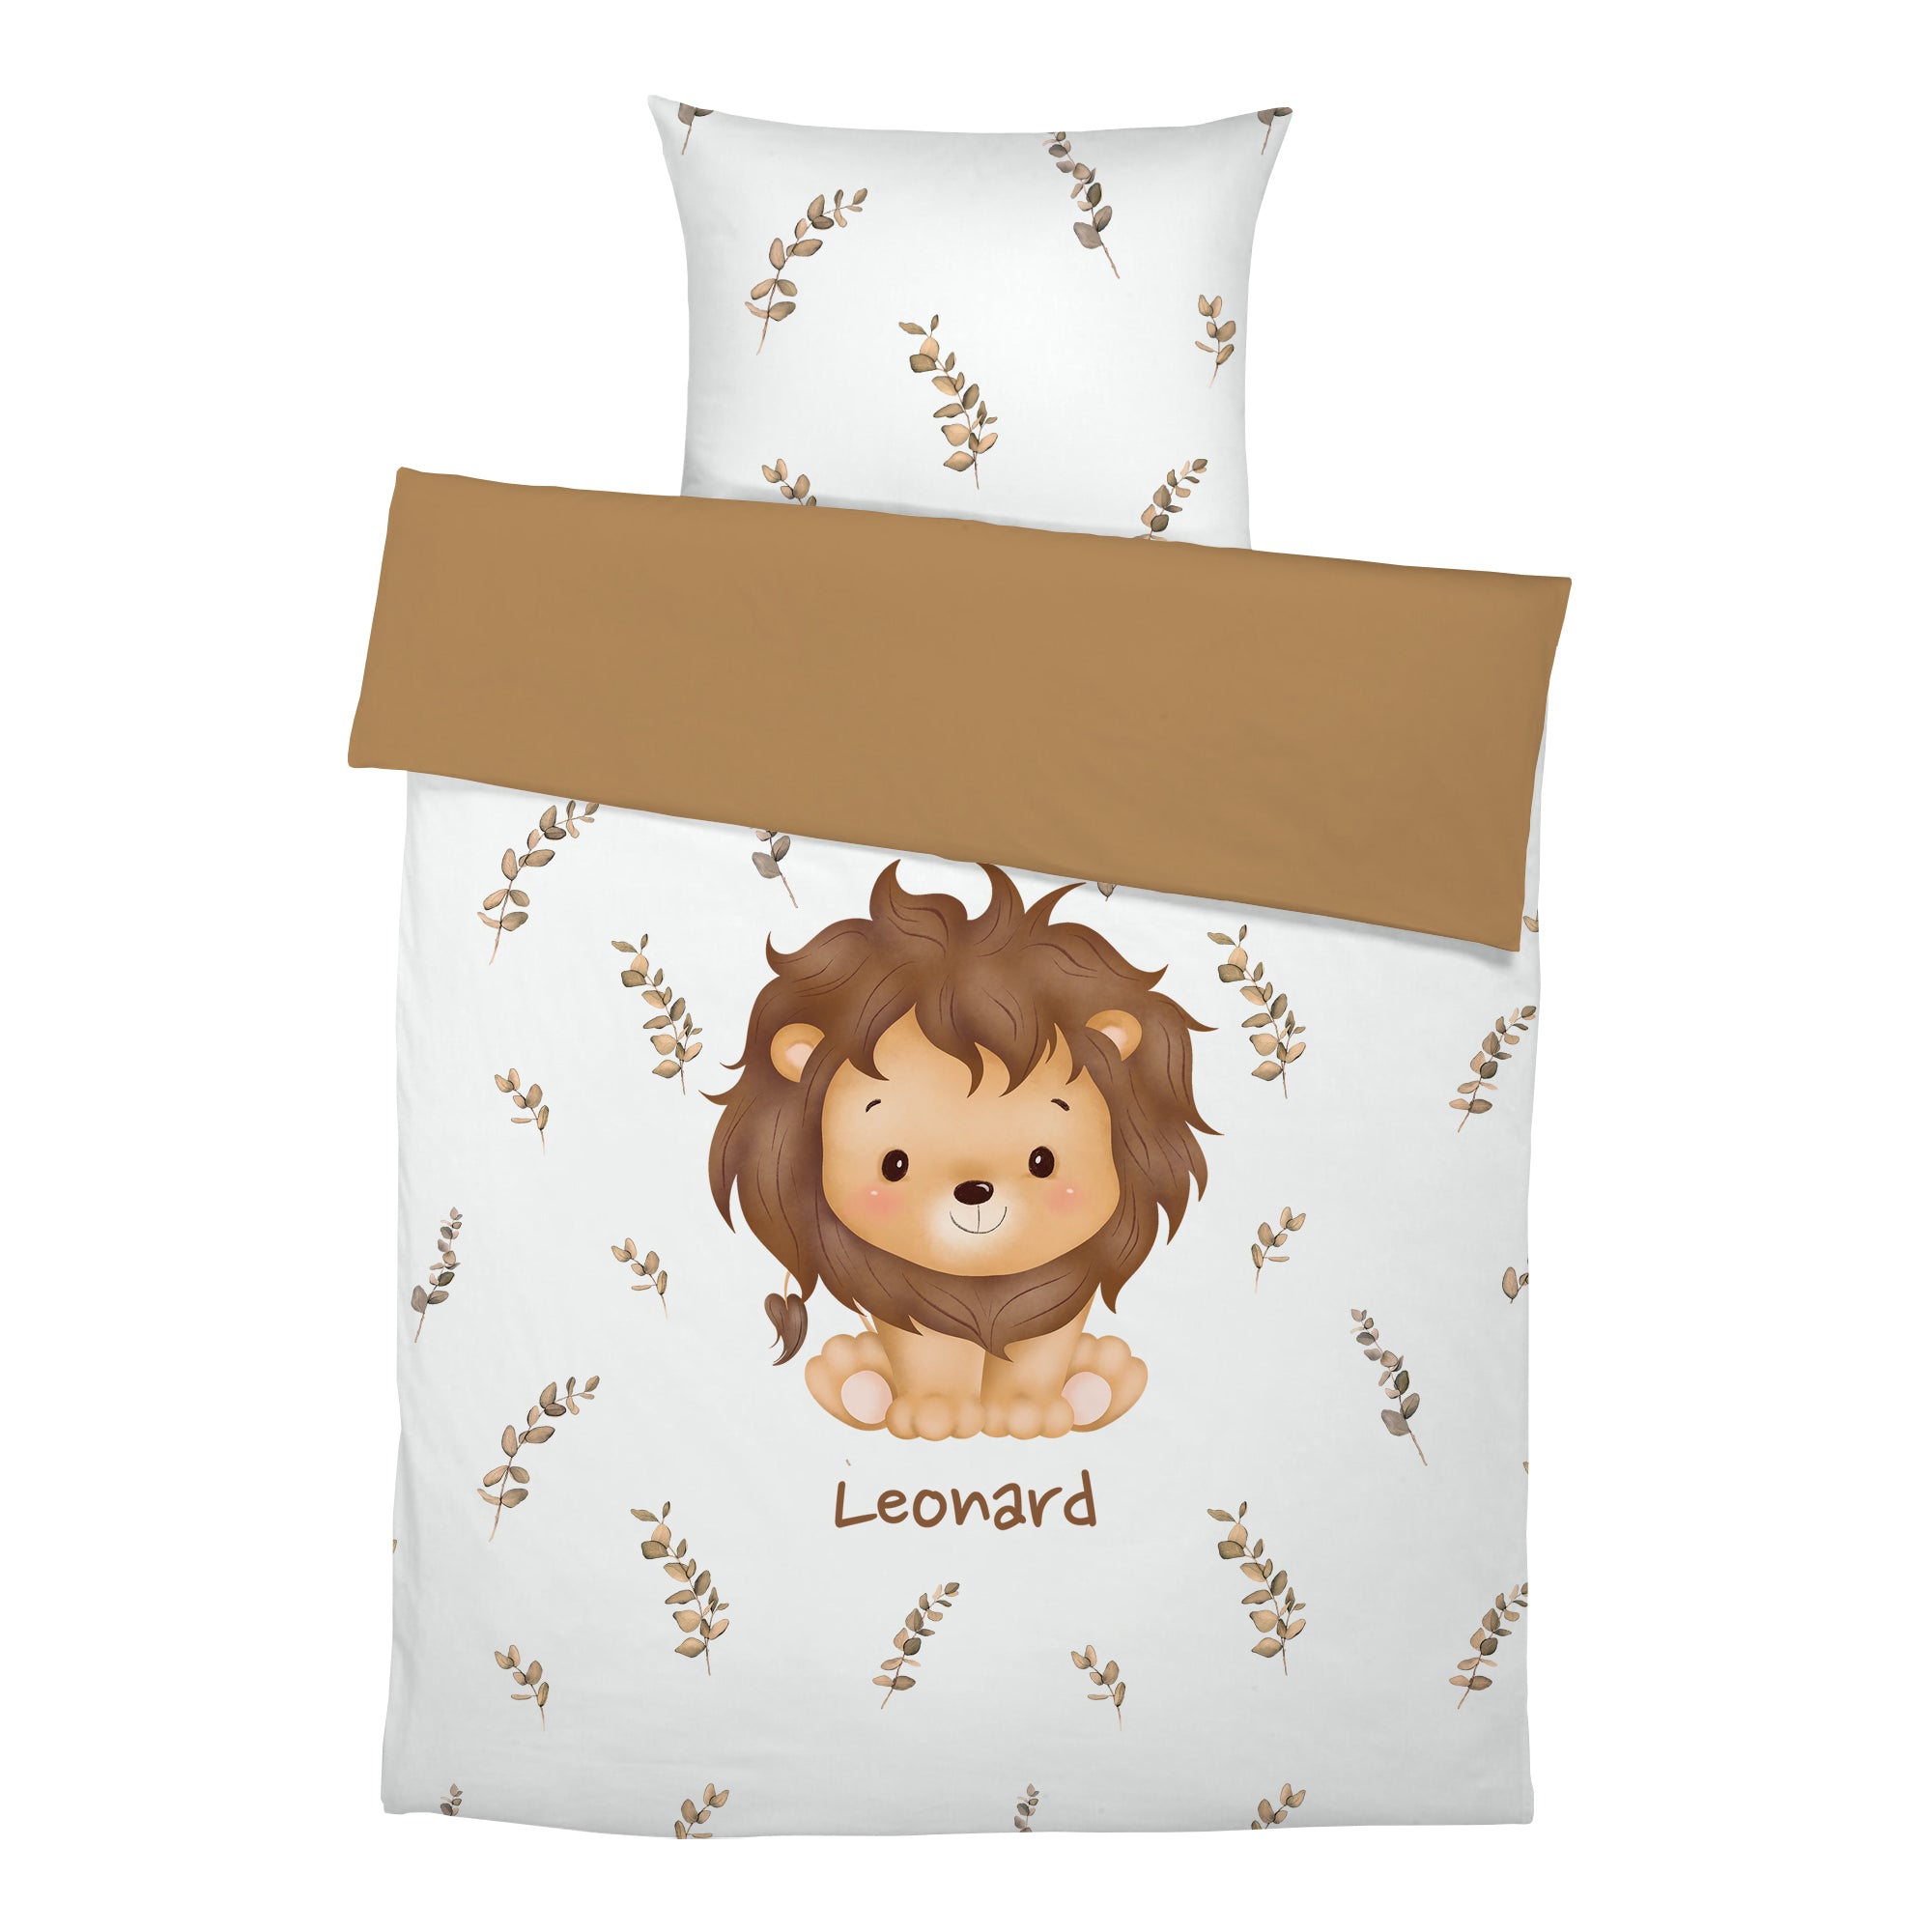 "The little lion" premium bed linen with name